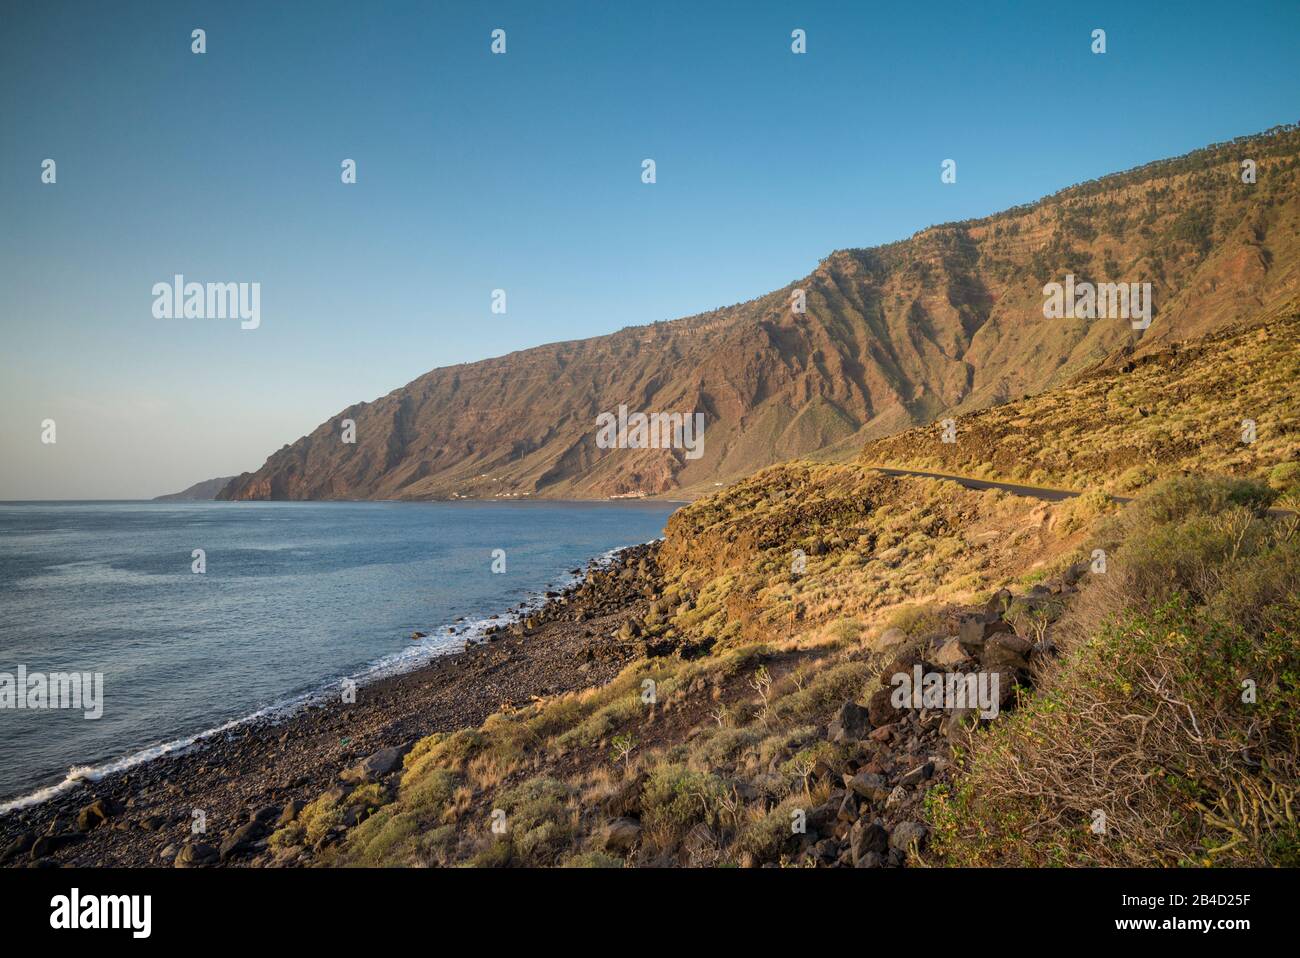 Spain, Canary Islands, El Hierro Island, east coast, view from the HI 2 highway Stock Photo